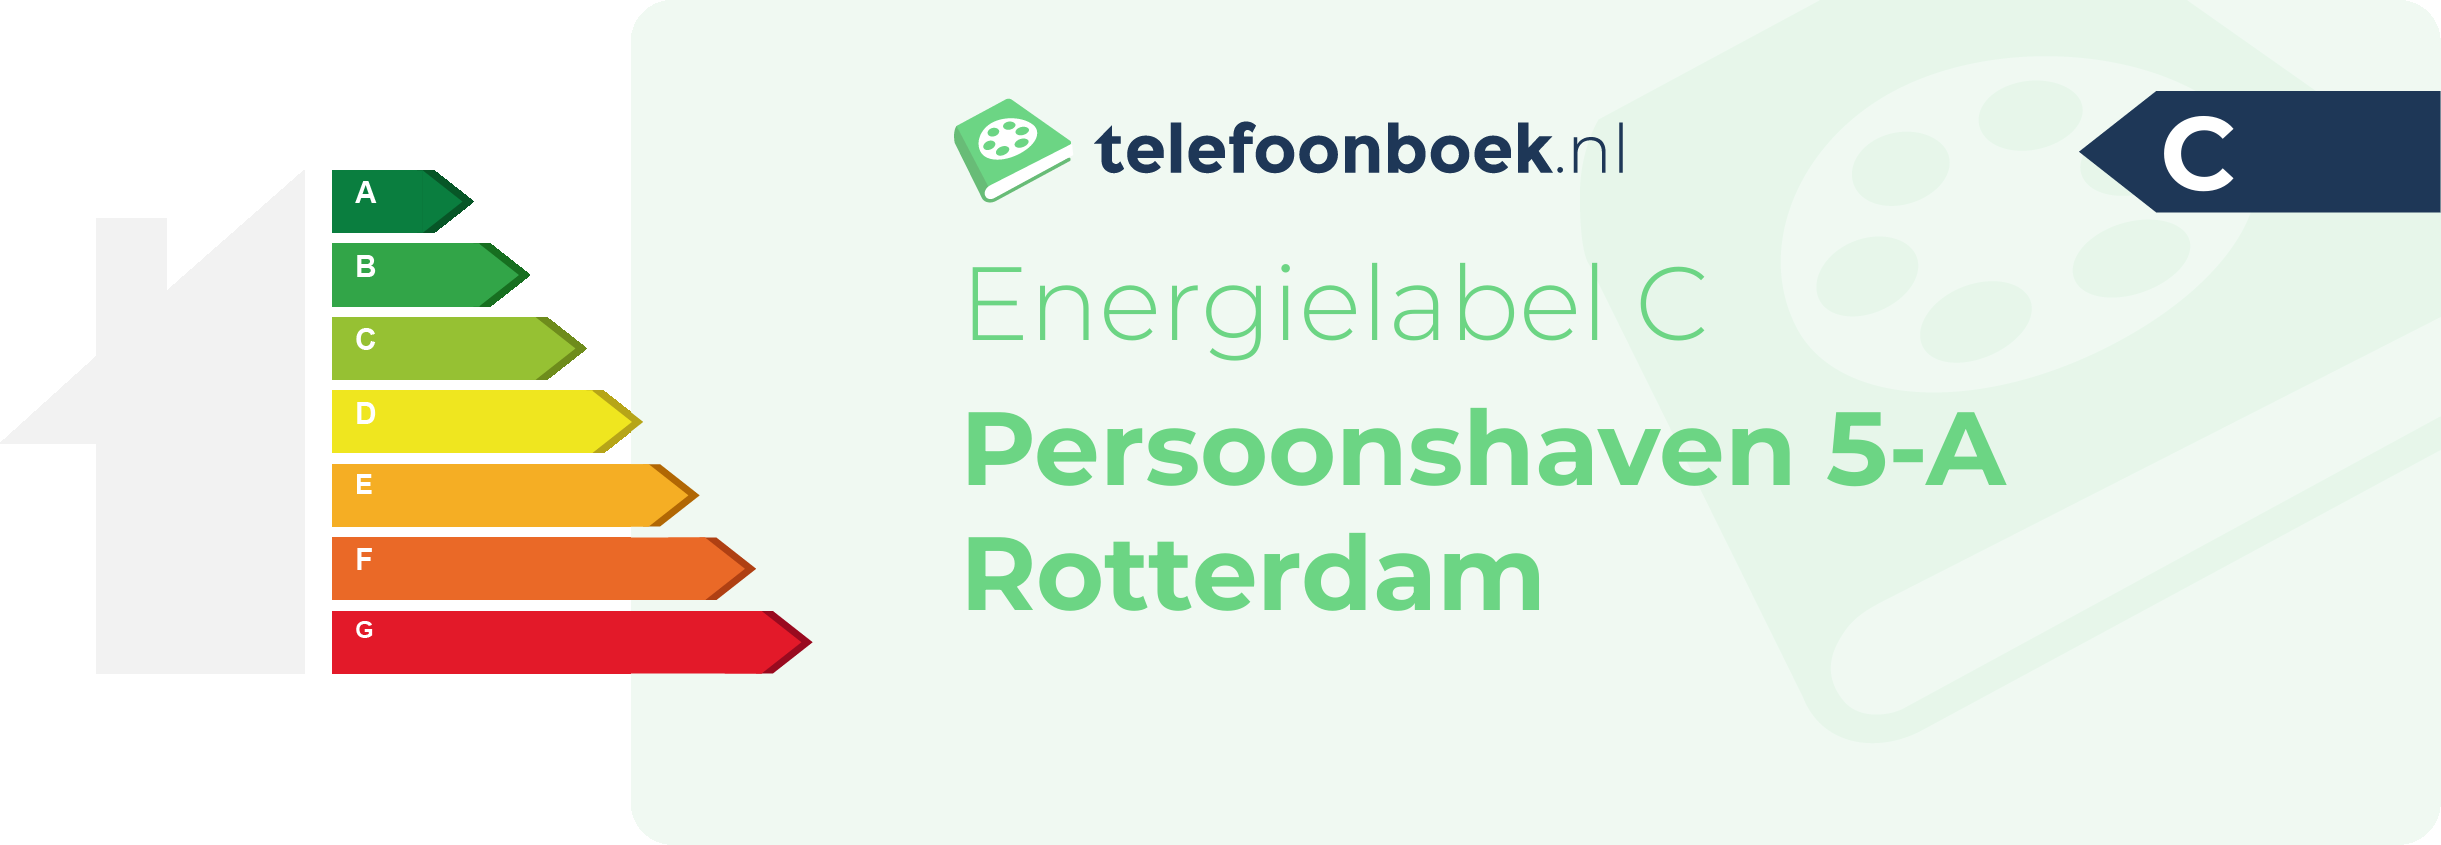 Energielabel Persoonshaven 5-A Rotterdam